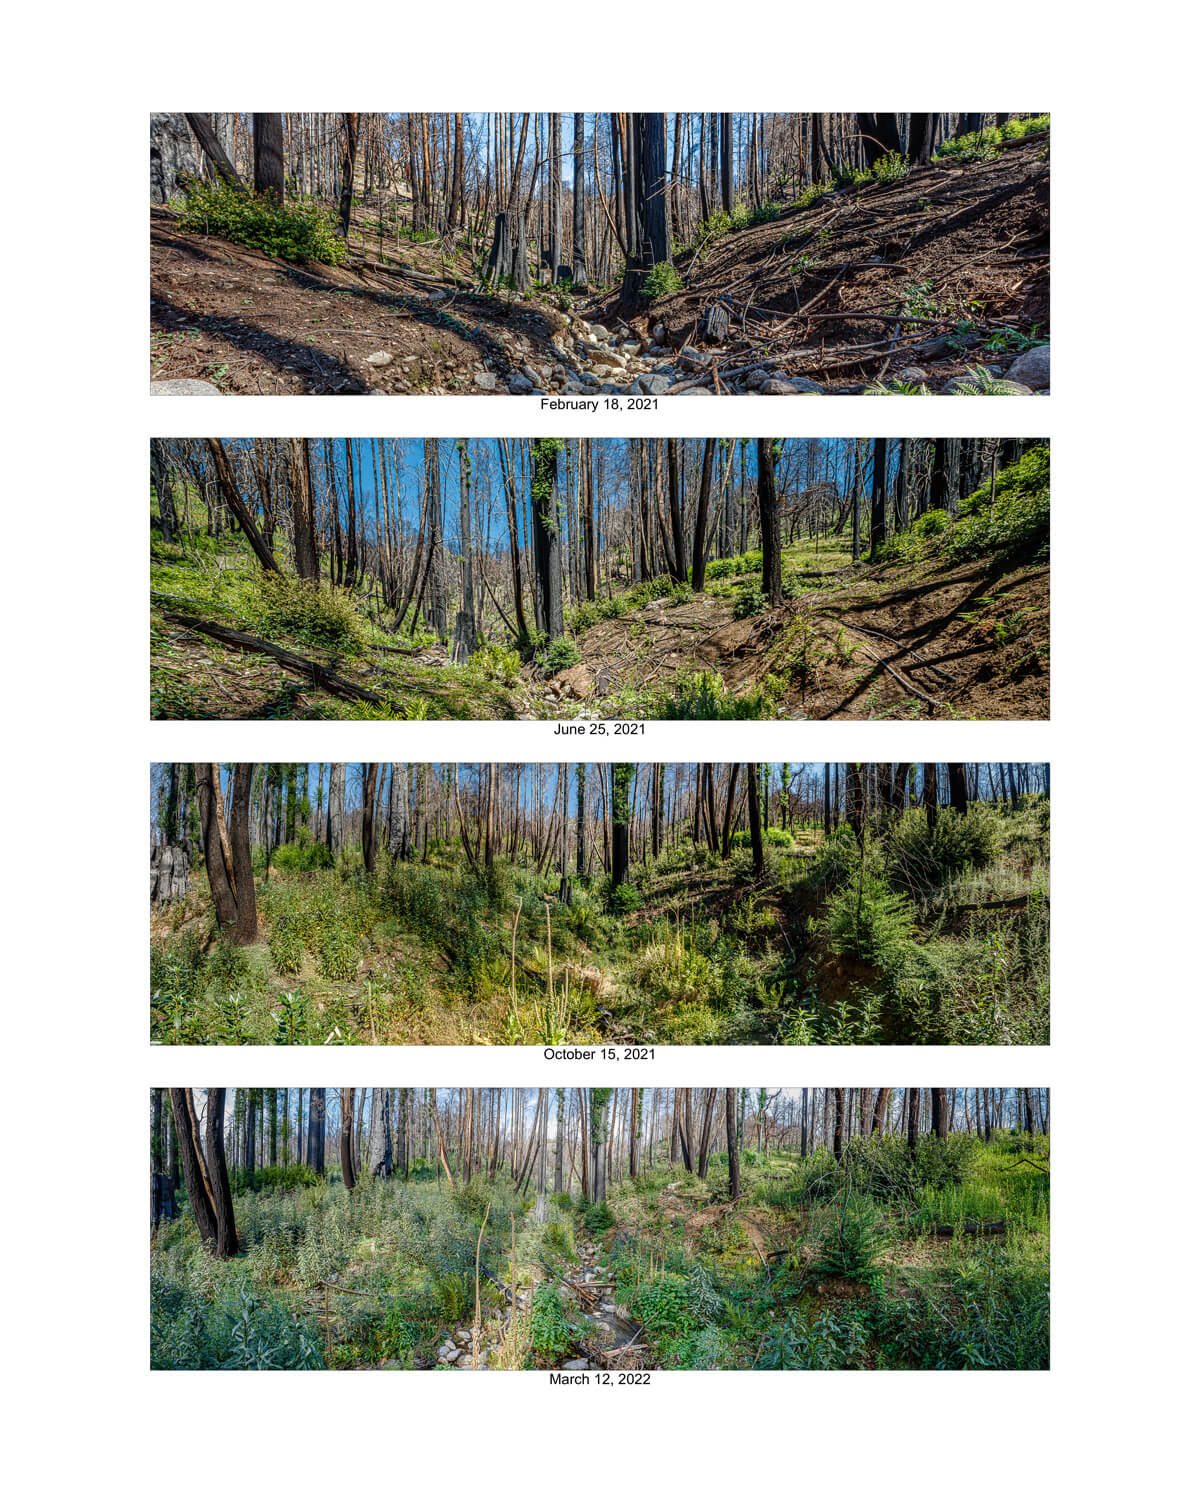 A group of four panoramic photos show the post-fire recovery of a section of forest around a small stream as green growth and water return from February 18, 2021 to March 12, 2022, by Ian Bornarth